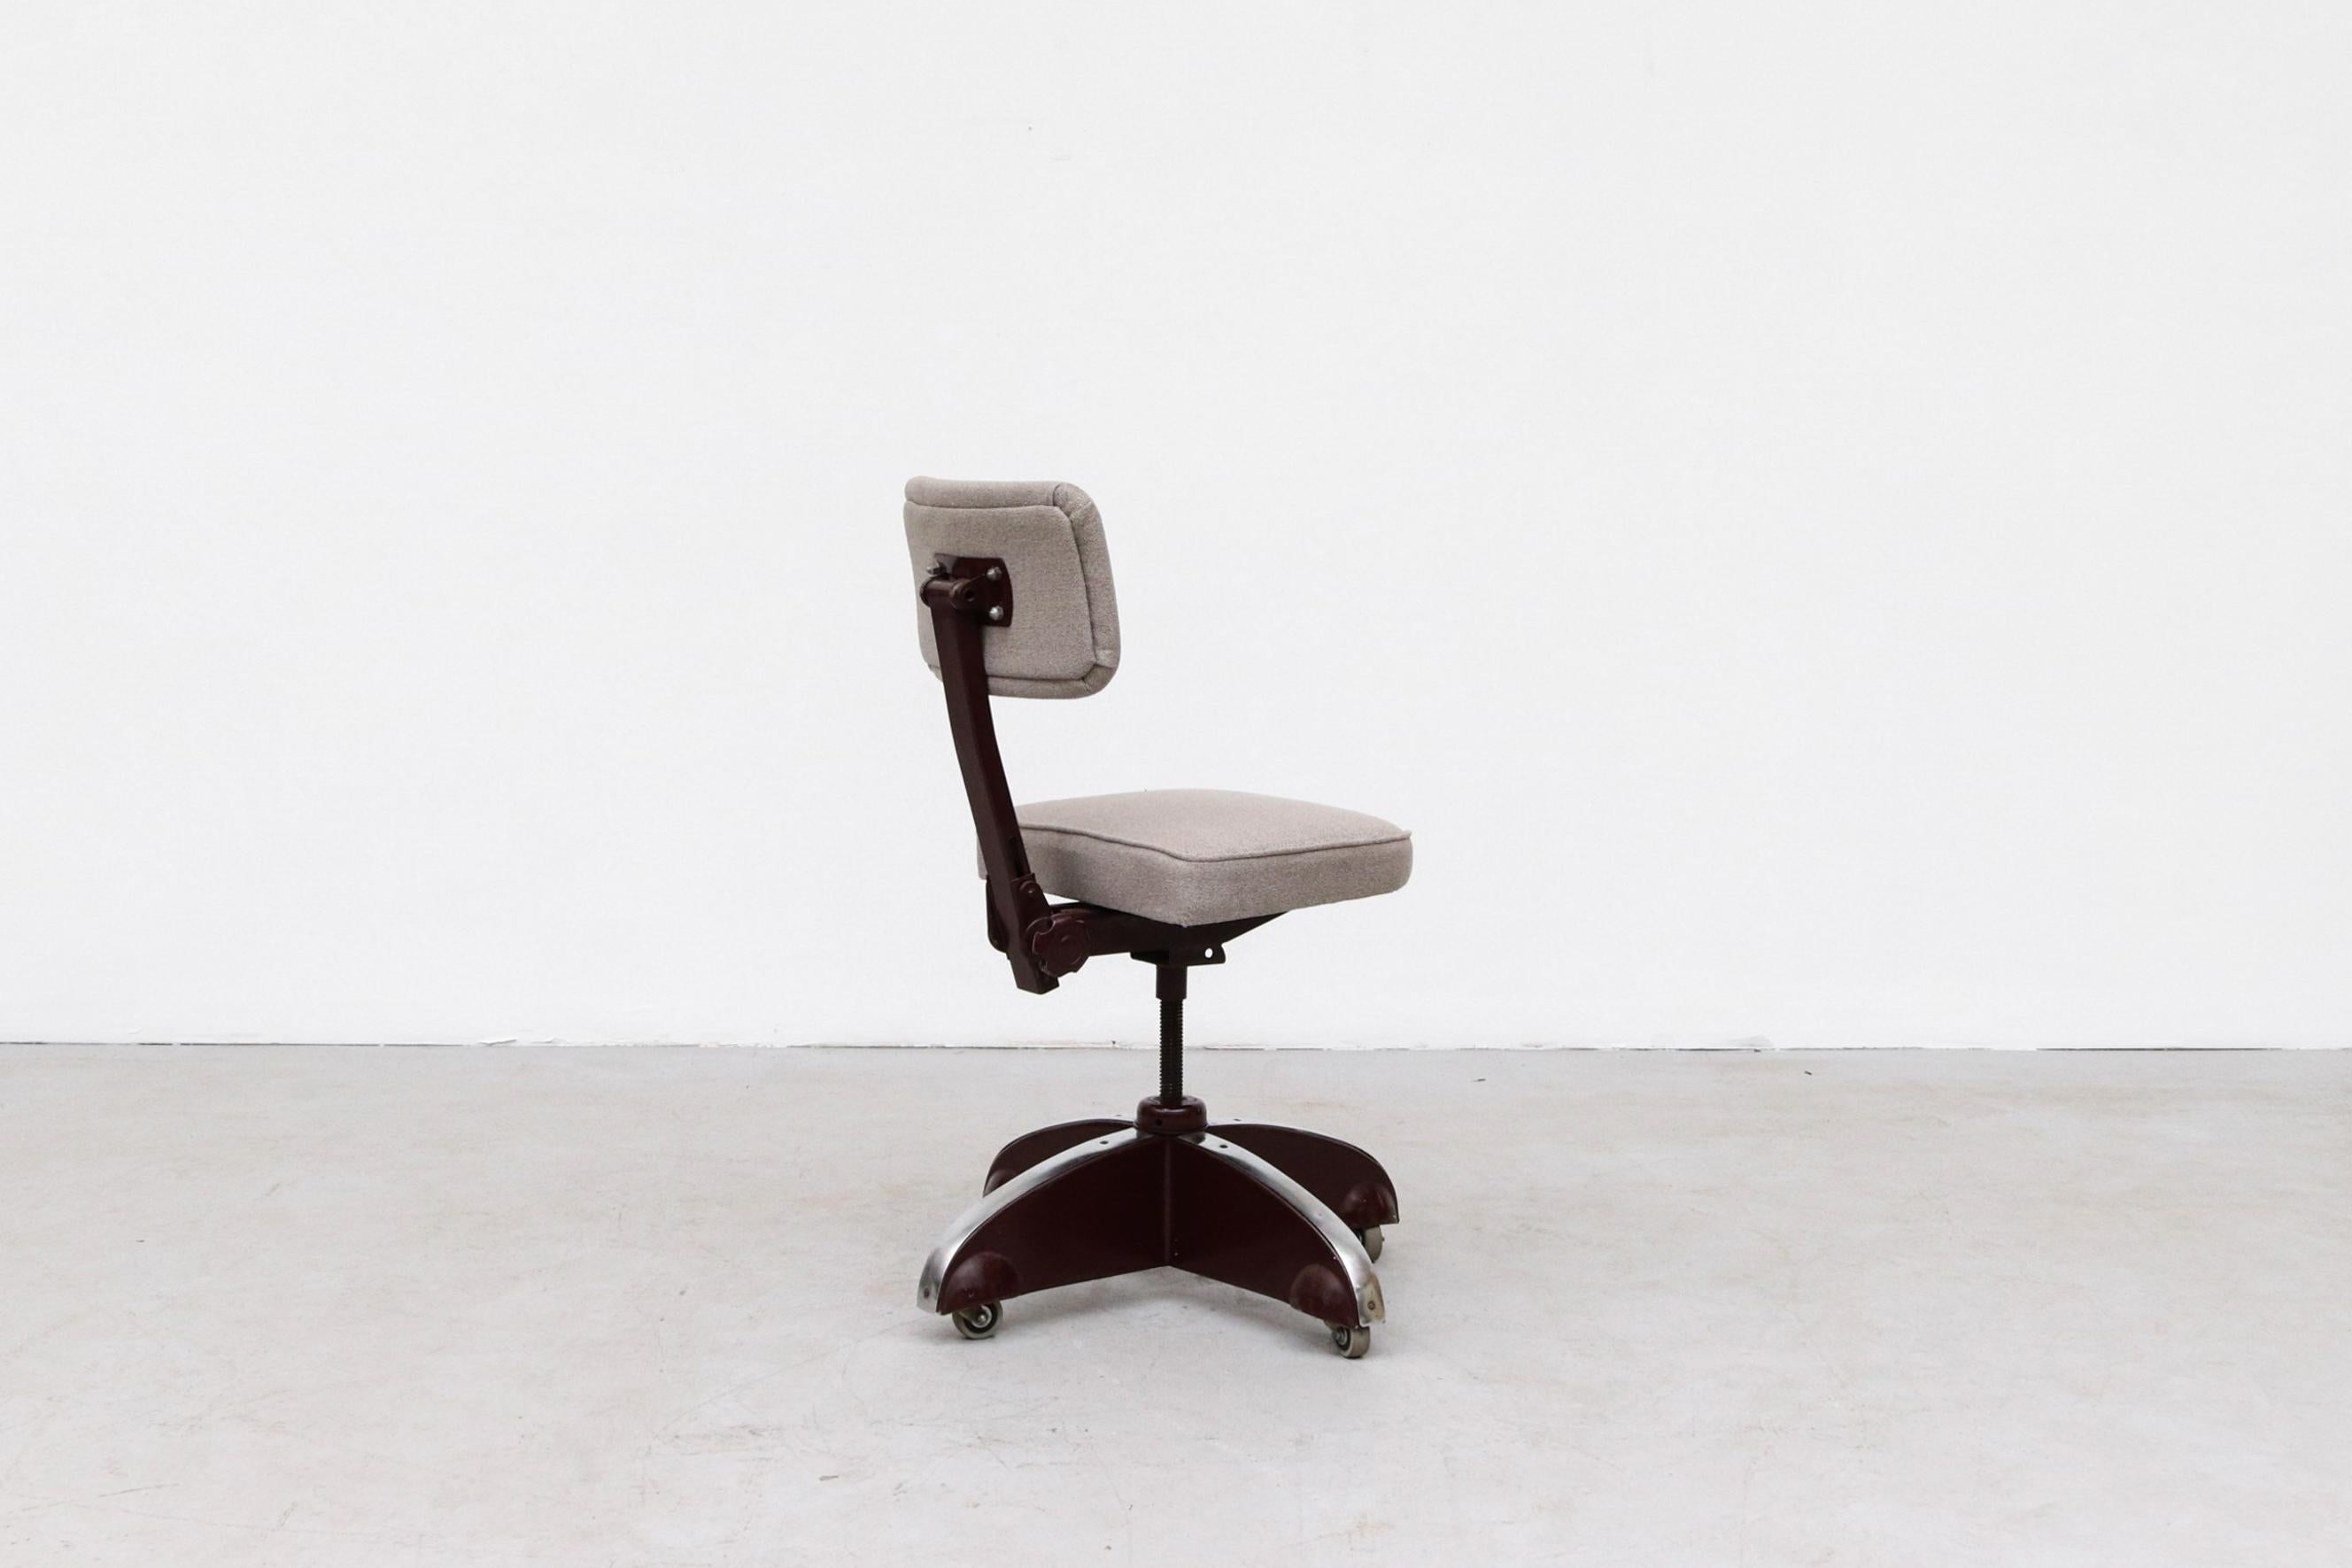 Ahrend De Cirkel Industrial Rolling Office Chair in Plum with Gray Upholstery In Good Condition For Sale In Los Angeles, CA